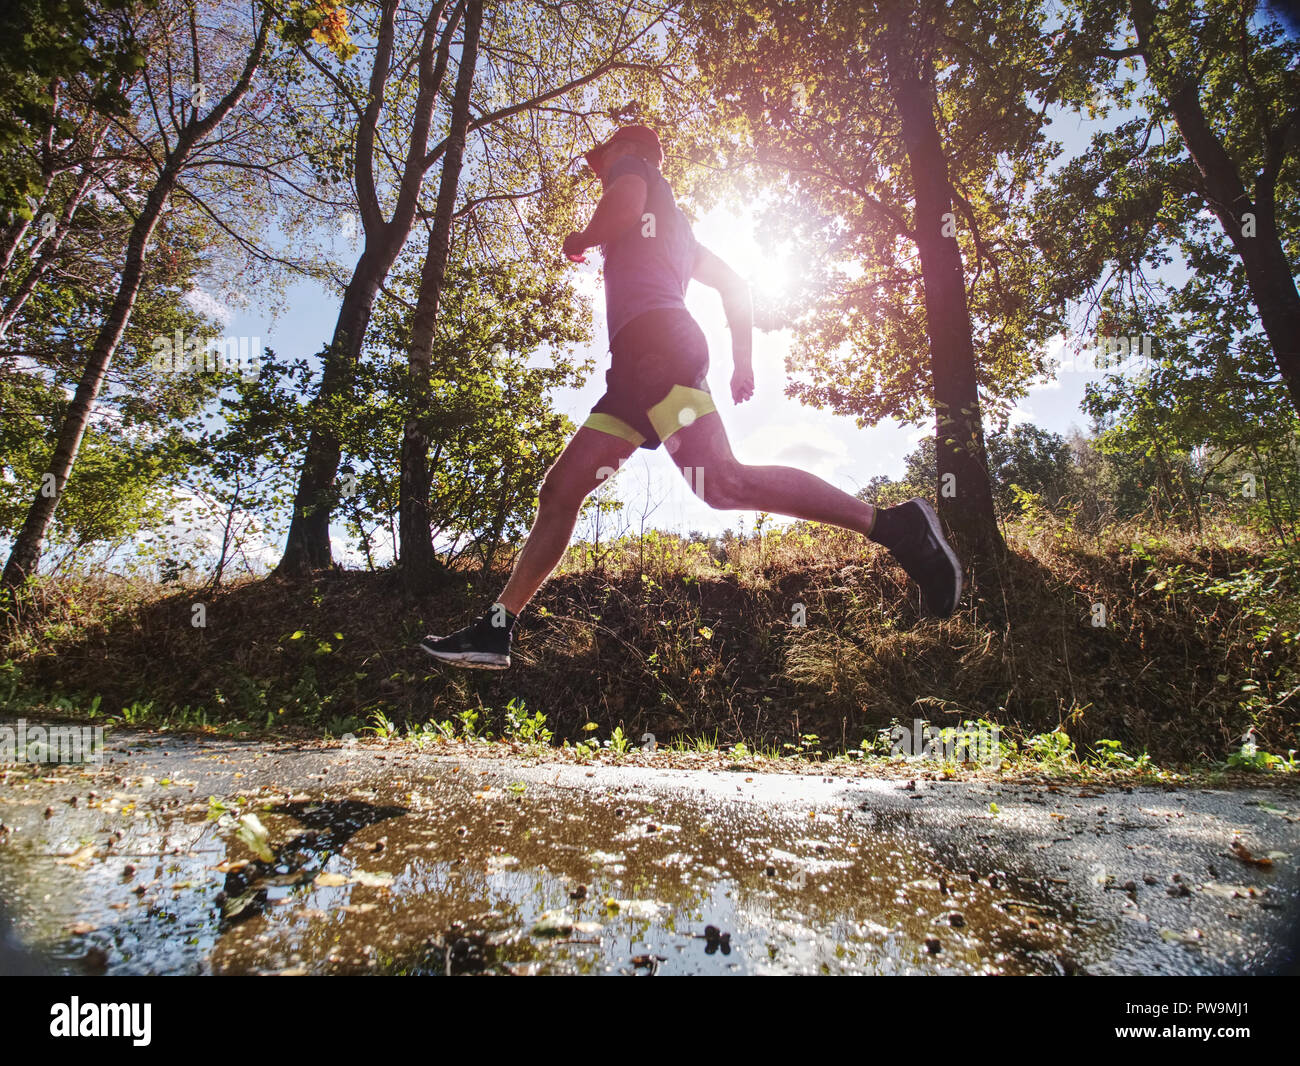 Recreation run during a sports activities in the open air forest. Summer running workout in health care and competition concept Stock Photo